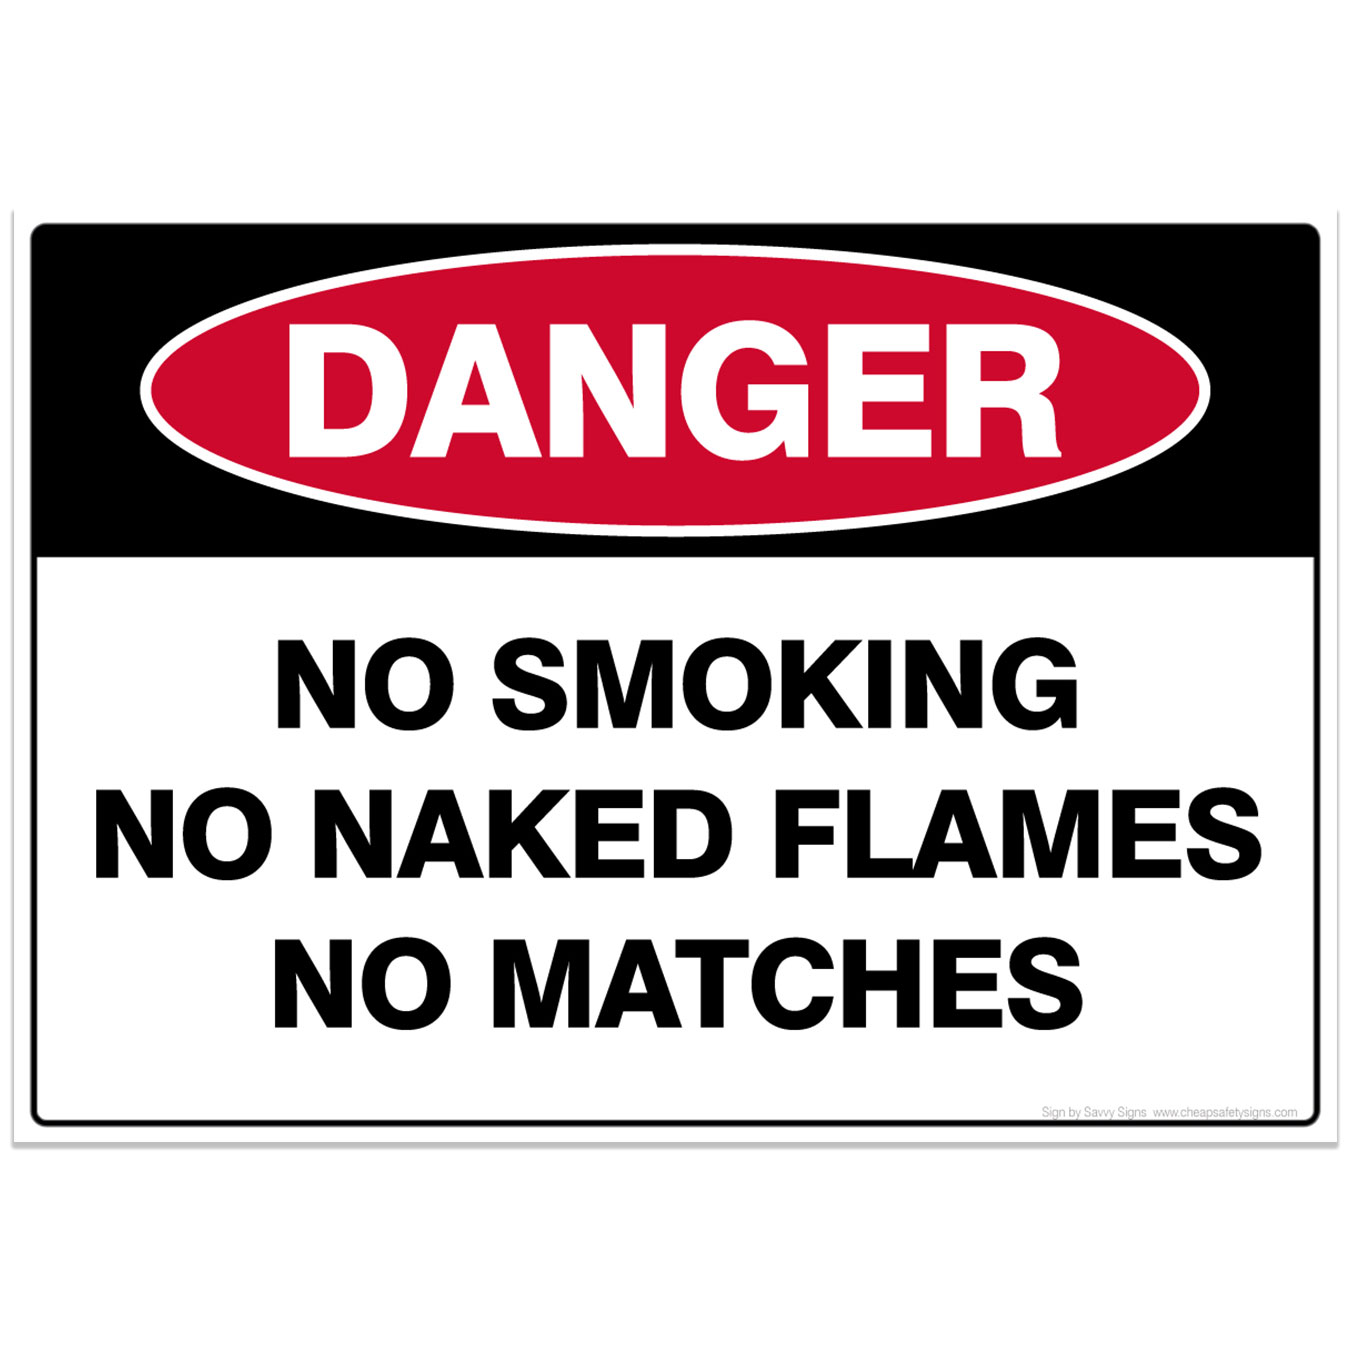 No smoking or naked flames safety sign 